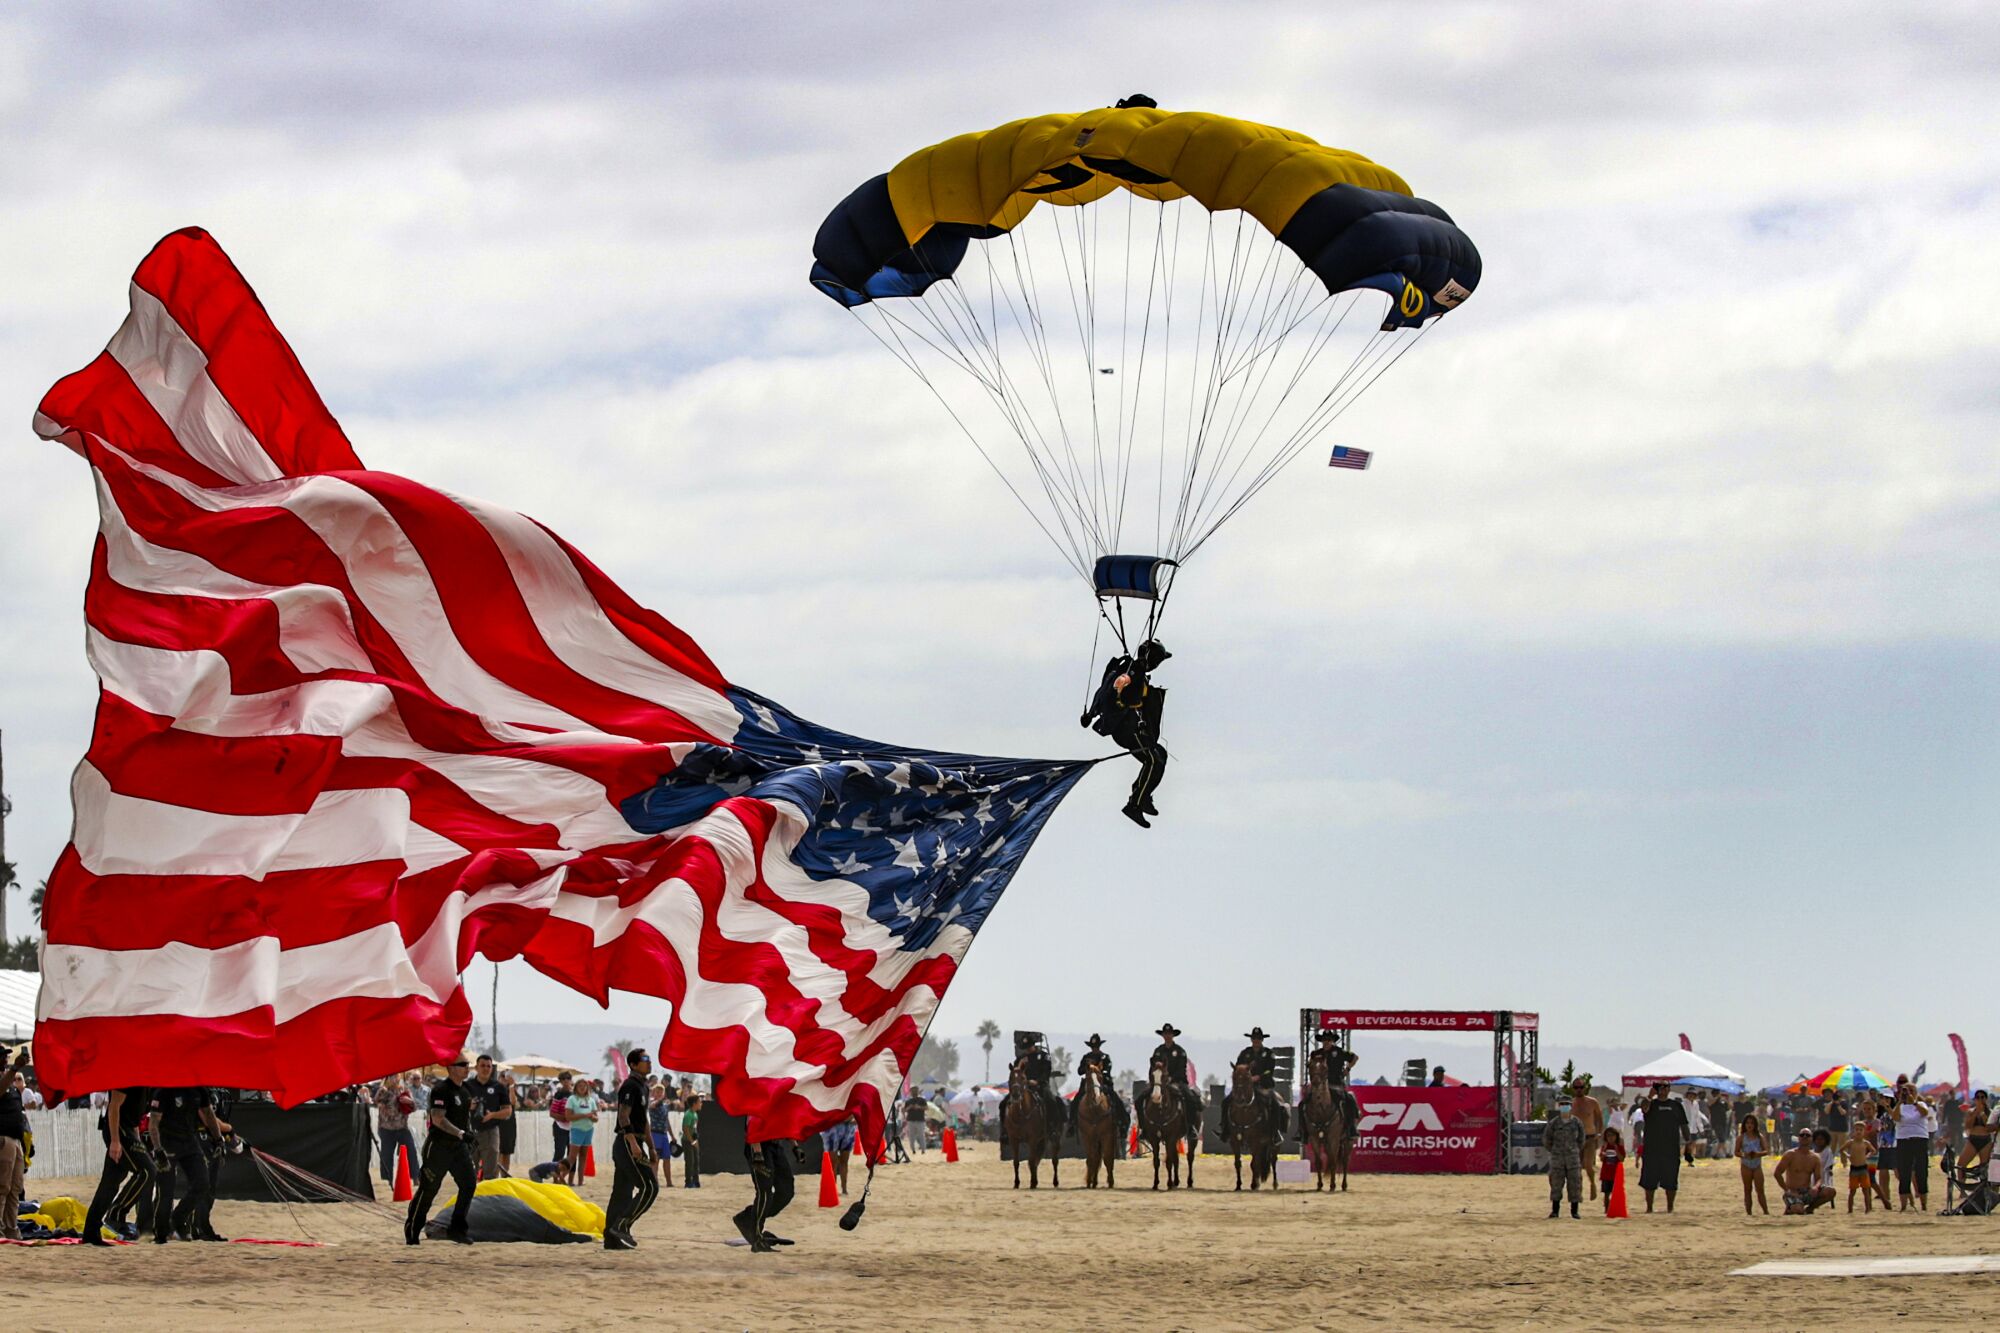 U.S. Navy Leap Frogs perform parachute jumping during the Pacific Airshow 